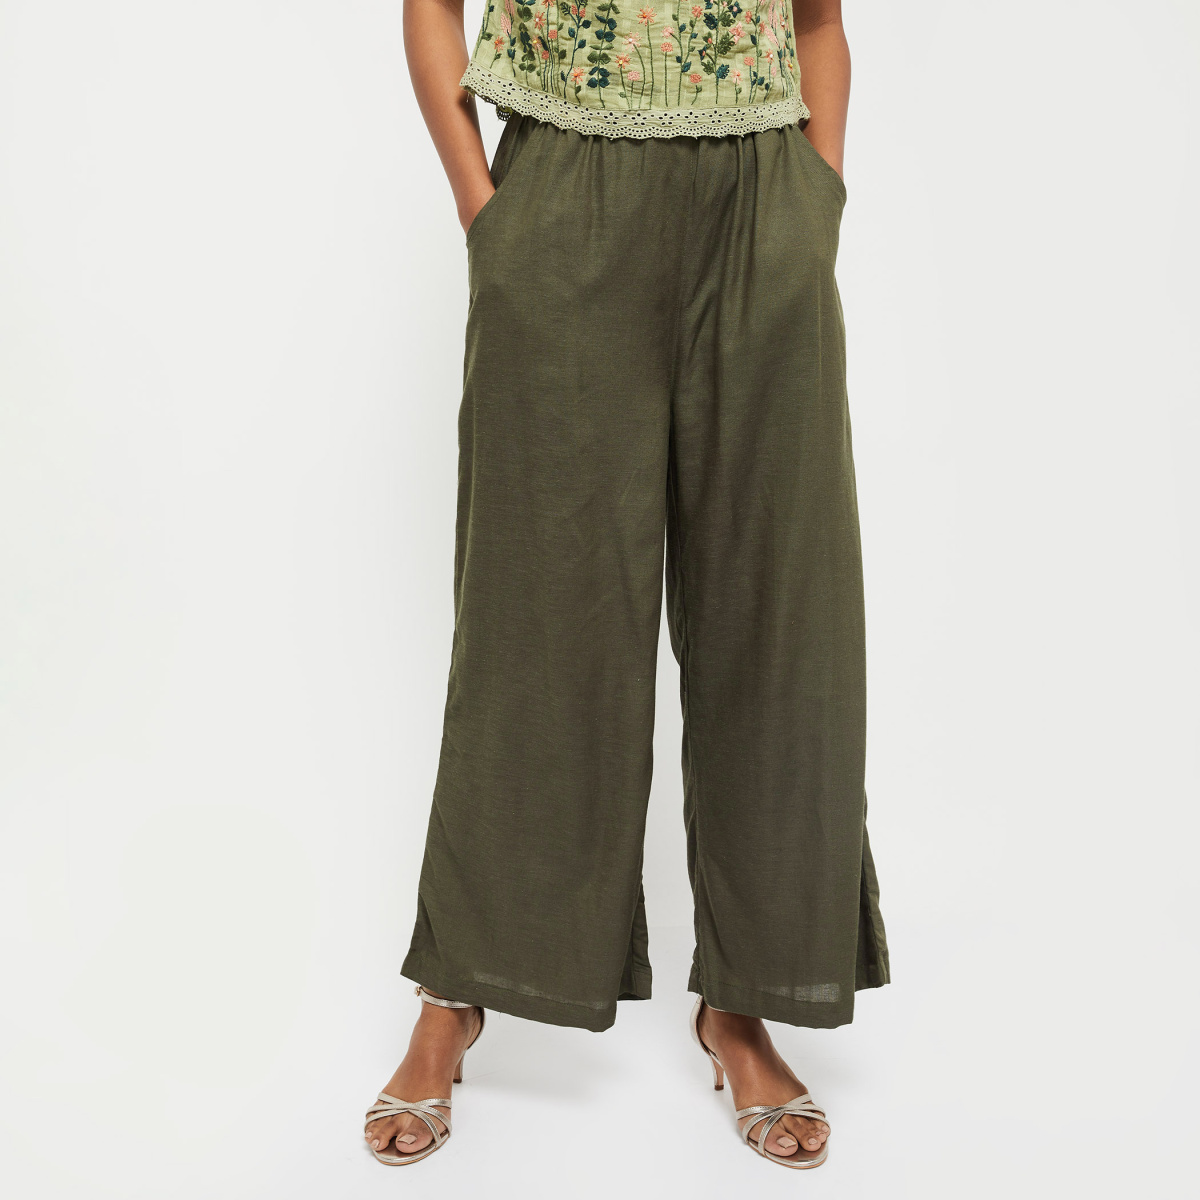 Buy Chic Attire Women's Cotton Solid Palazzo Pants Color Green Size XL at  Amazon.in